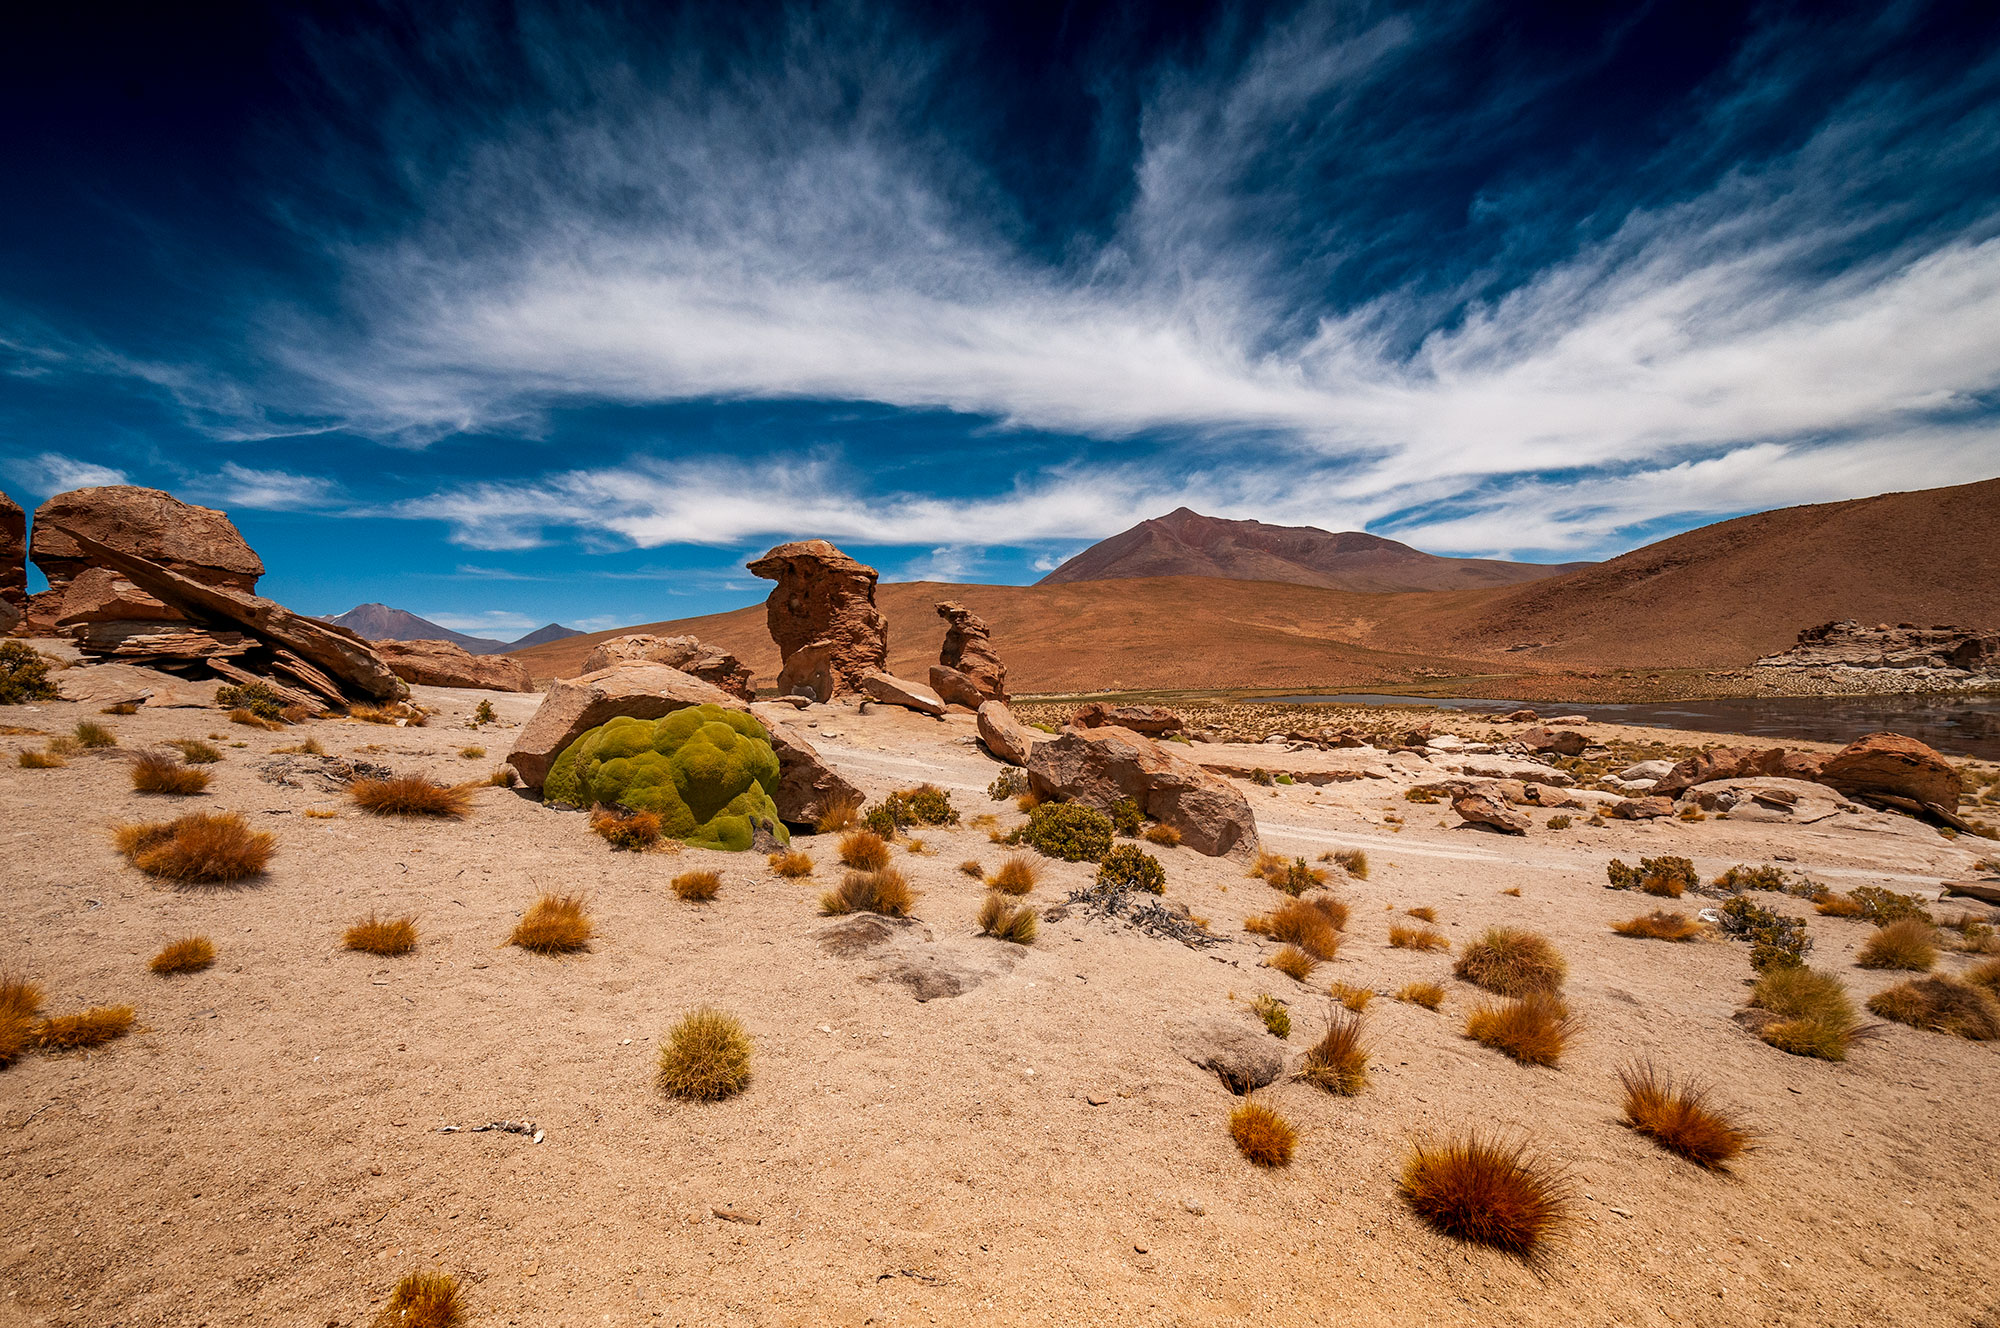 Photo of the desert landscapes of the Bolivian Altiplano between Uyuni and the Bolivian border. This photograph was taken by Swiss landscape photographer Jennifer Esseiva.